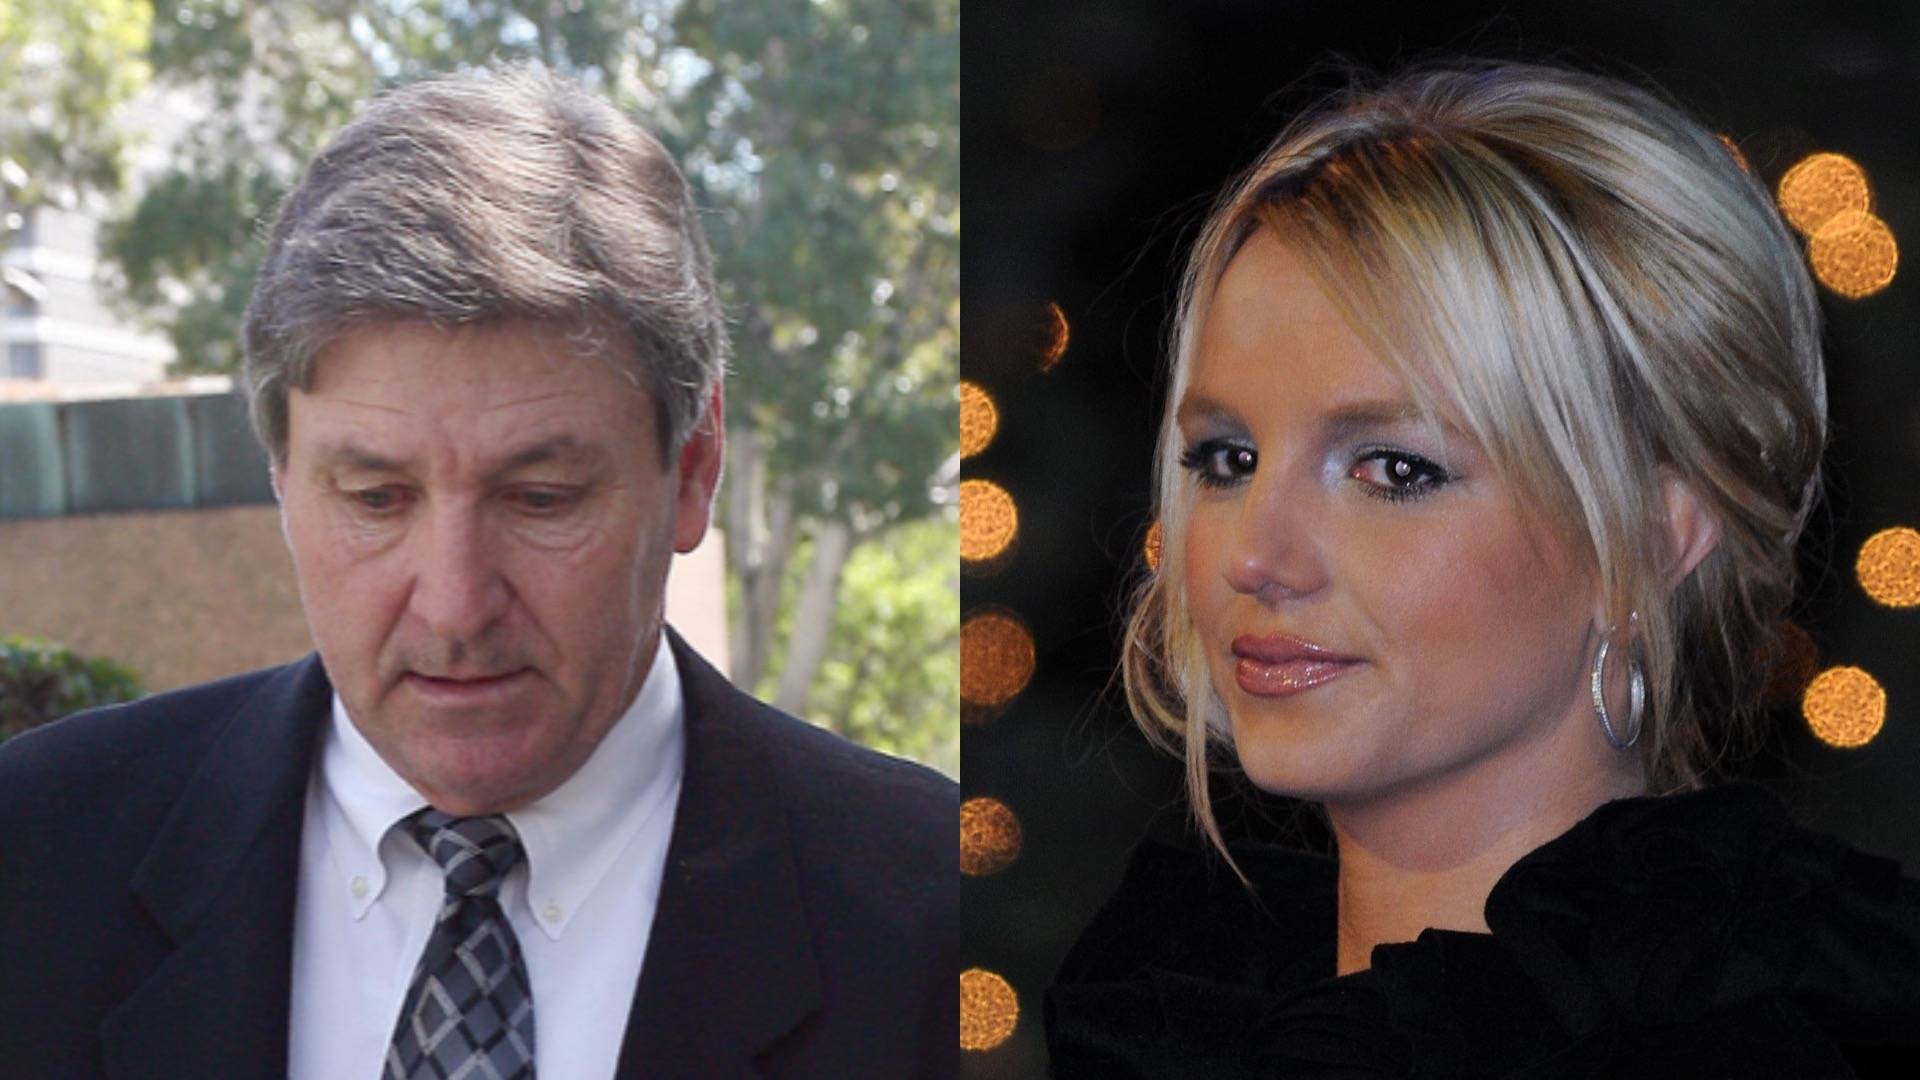 Britney Spears and father James "Jamie" Spears in composite photo